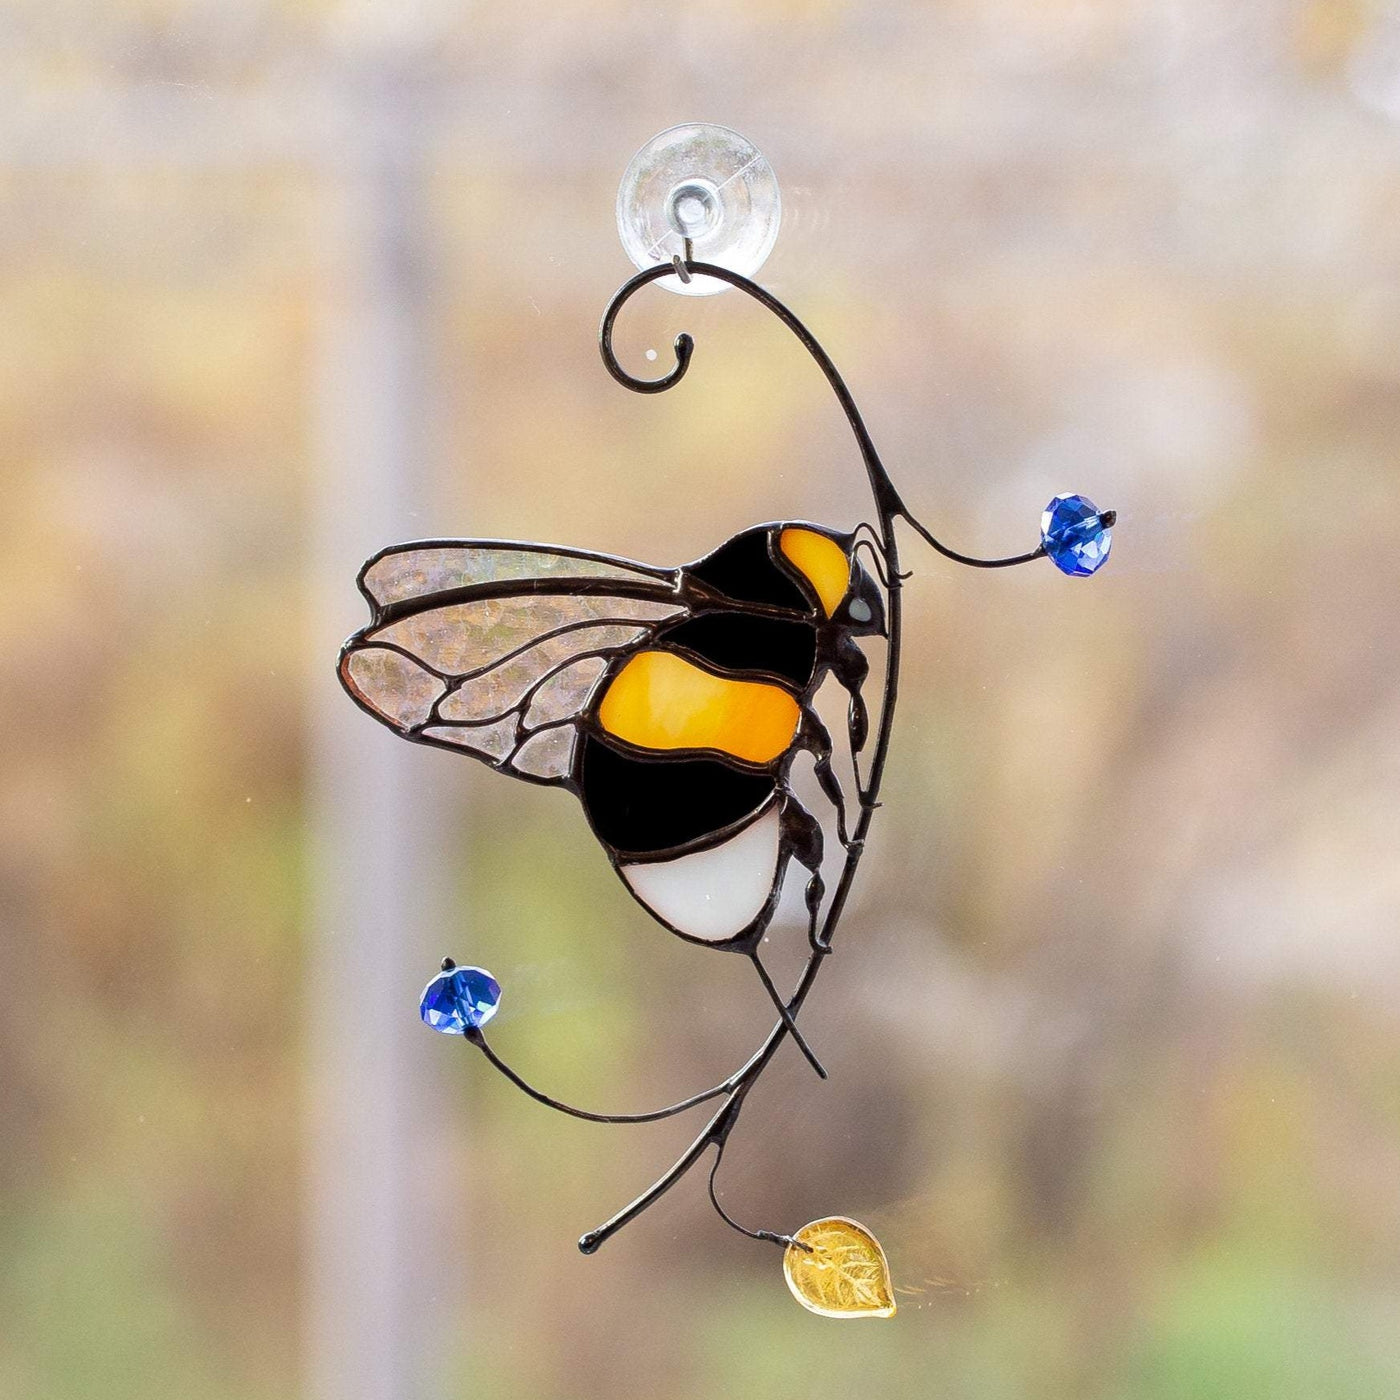 Clear-winged bumblebee sitting on the branch suncatcher